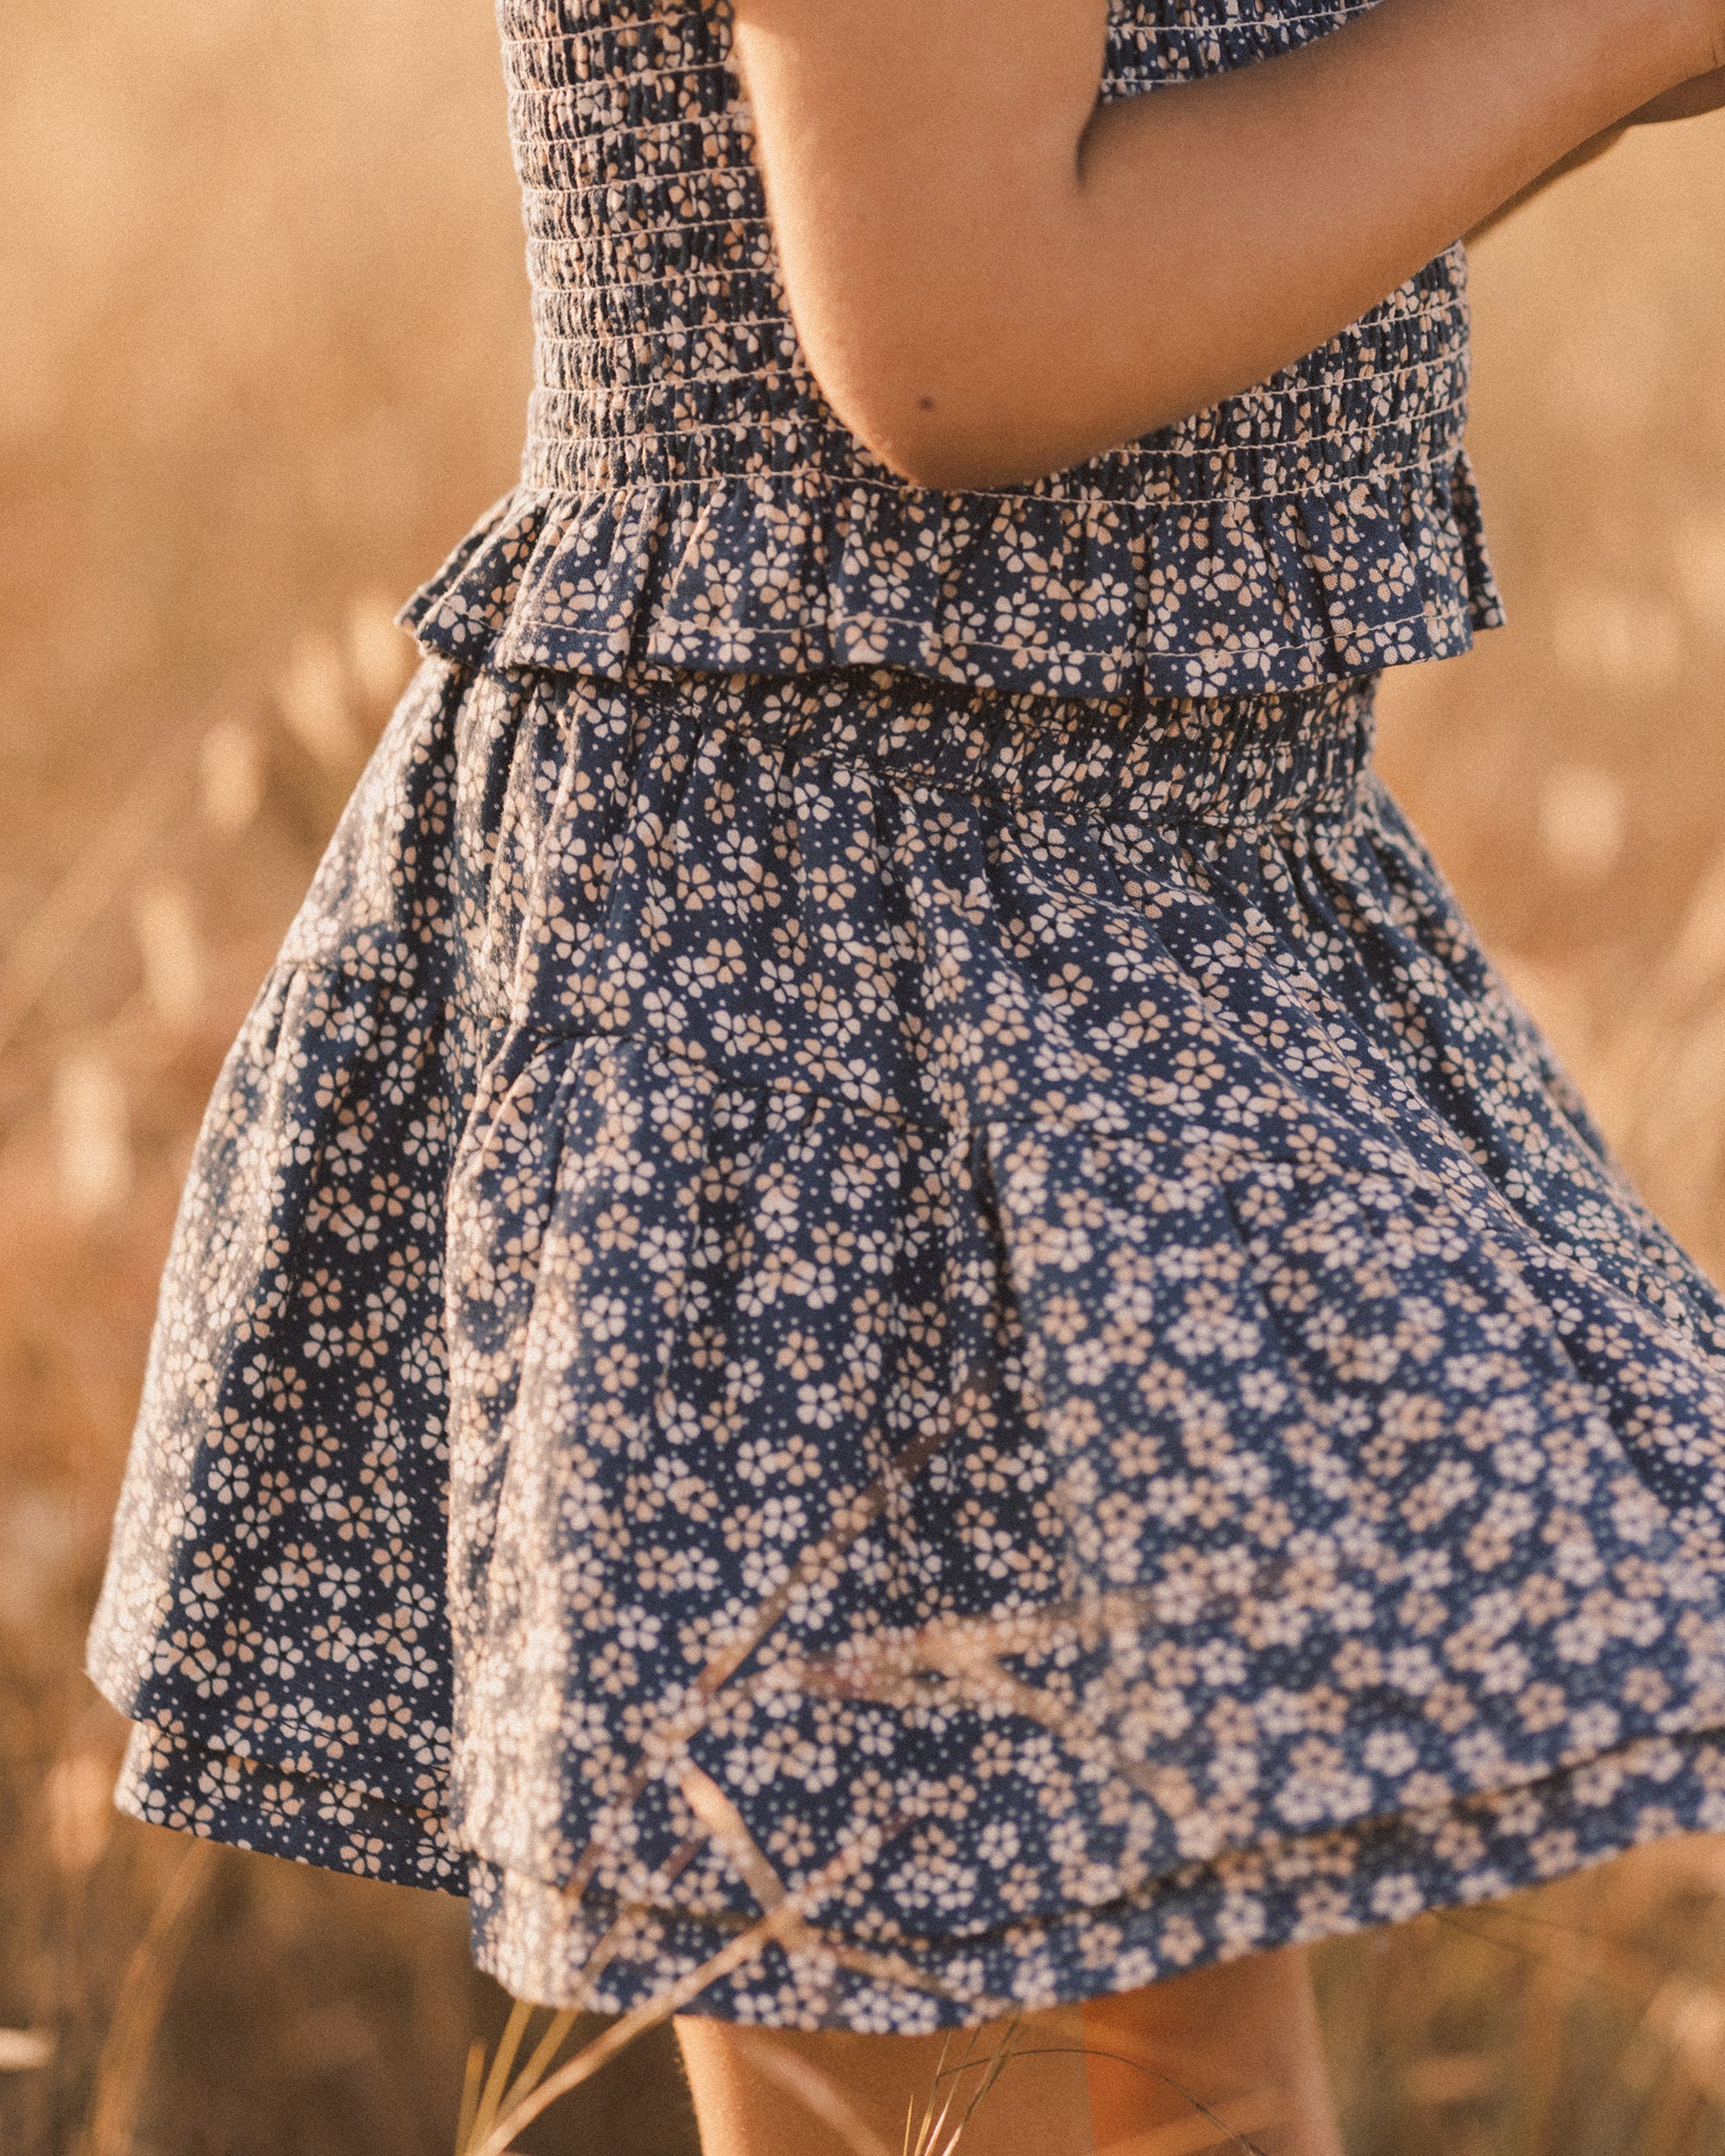 Tiered Mini Skirt | Blue Floral